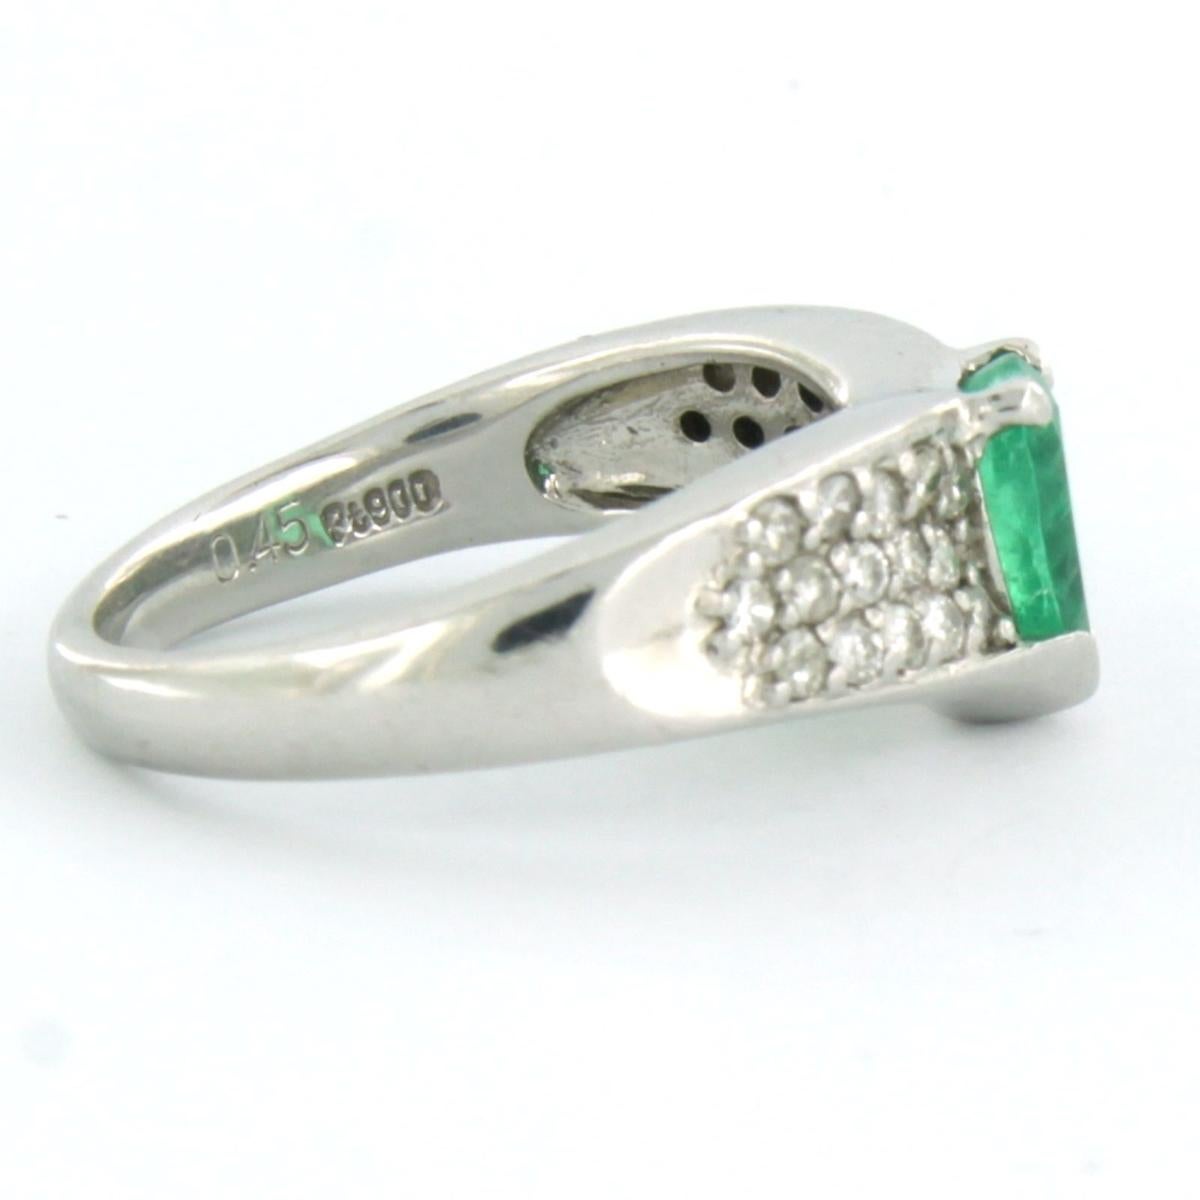 Platinum ring with emerald 0.80 ct and brilliant cut diamond 0.45 ct - F/G - SI - ring size U.S. 5.75 - EU. 16.25(51)

detailed description:

the top of the ring is 8.6 mm wide

weight 7.1 grams

ring size U.S. 5.75 - EU. 16.25(51), ring can be